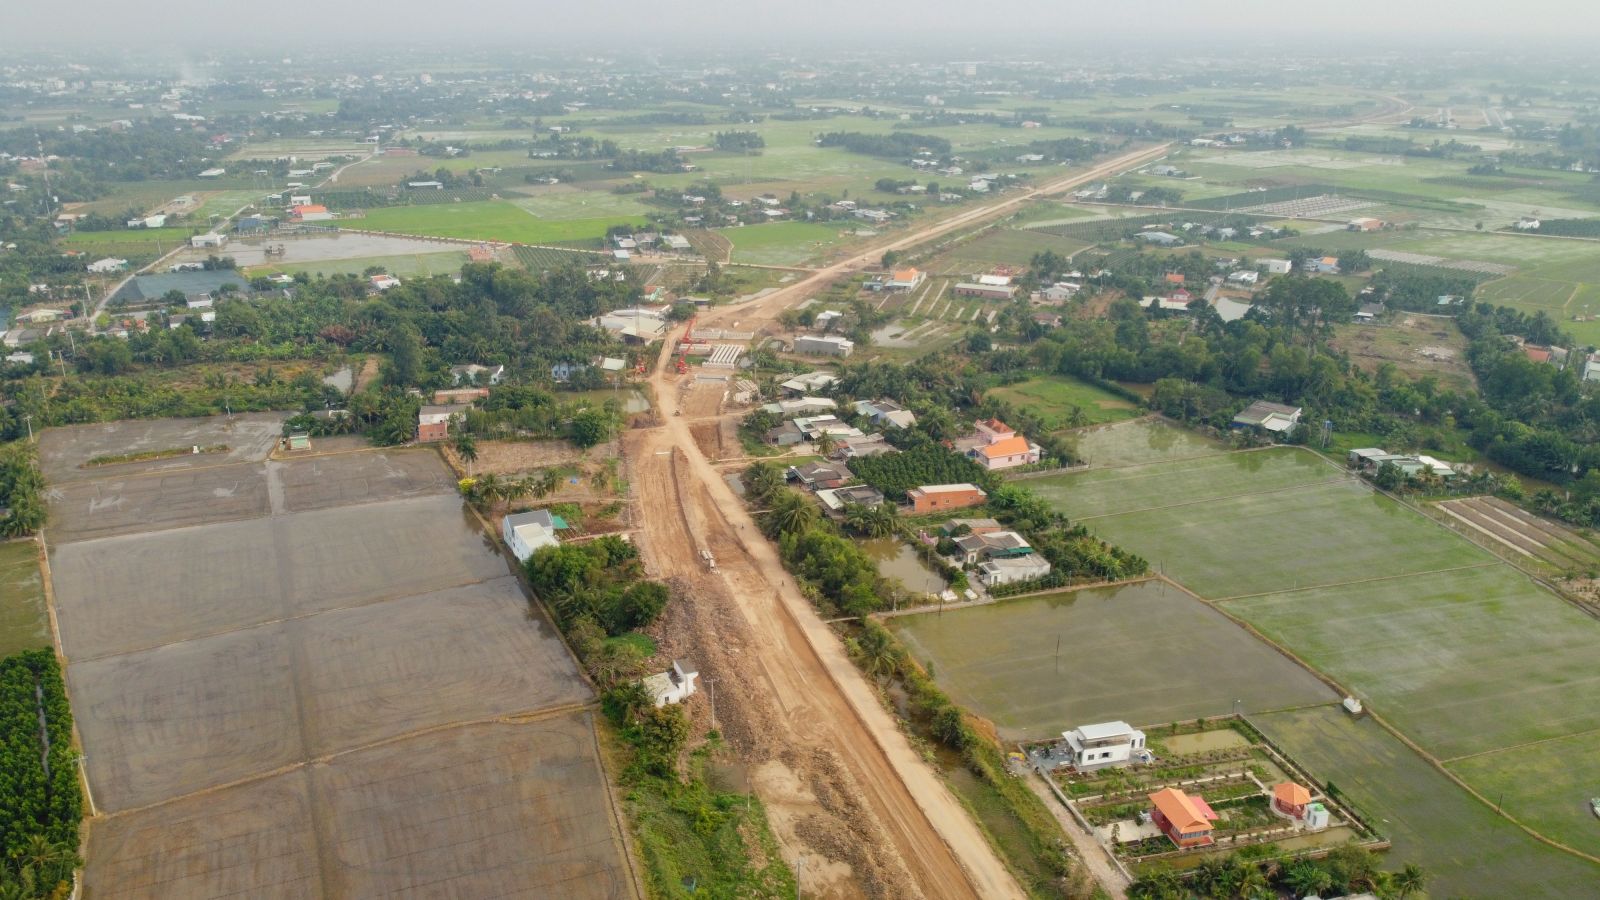 The section of Phan Van Tuan connecting Nguyen Tan Chinh is 6 kilometers long, designed with 4 lanes for cars, is in the process of leveling. This road is invested by the People's Committee of Tan An City